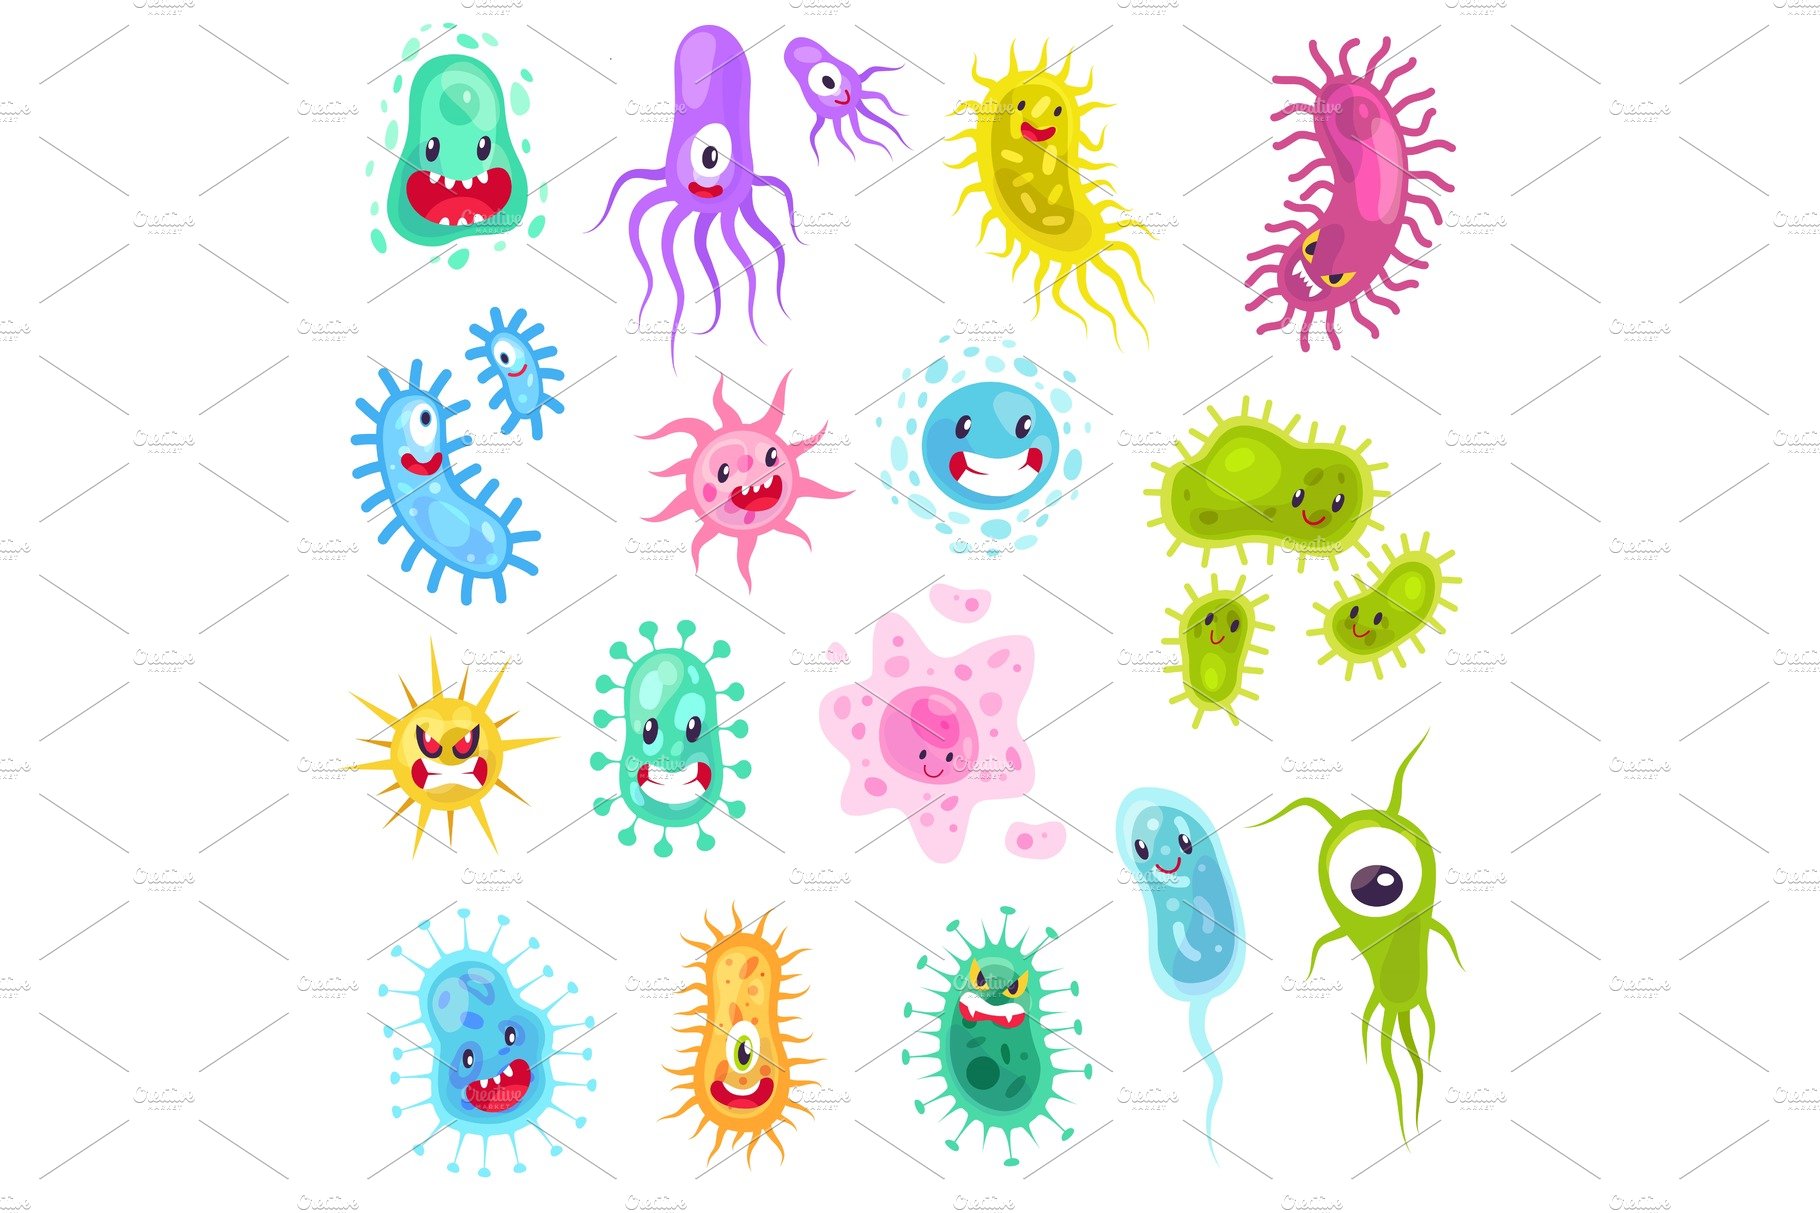 Virus characters. Funny cute monster cover image.